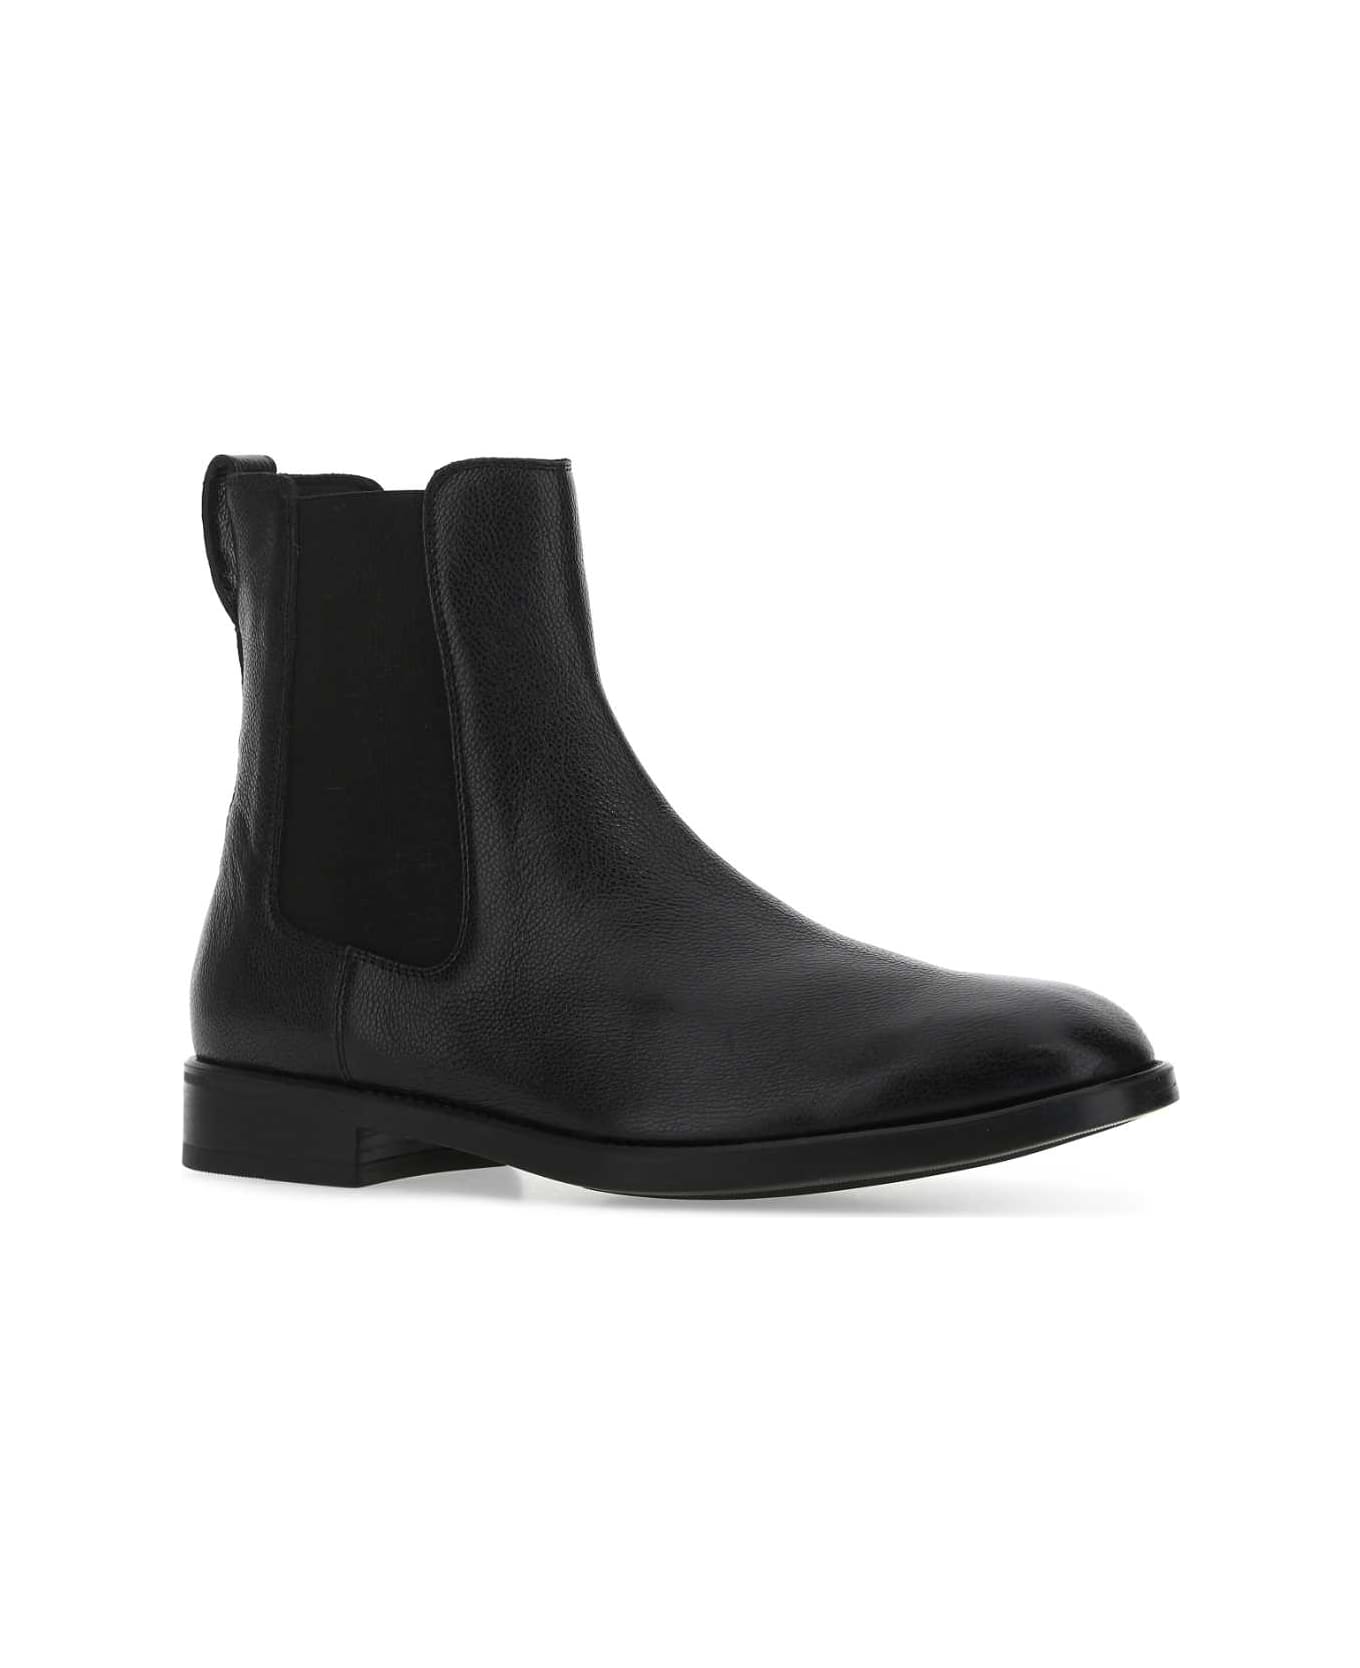 Tom Ford Black Leather Ankle Boots - U9000 ブーツ